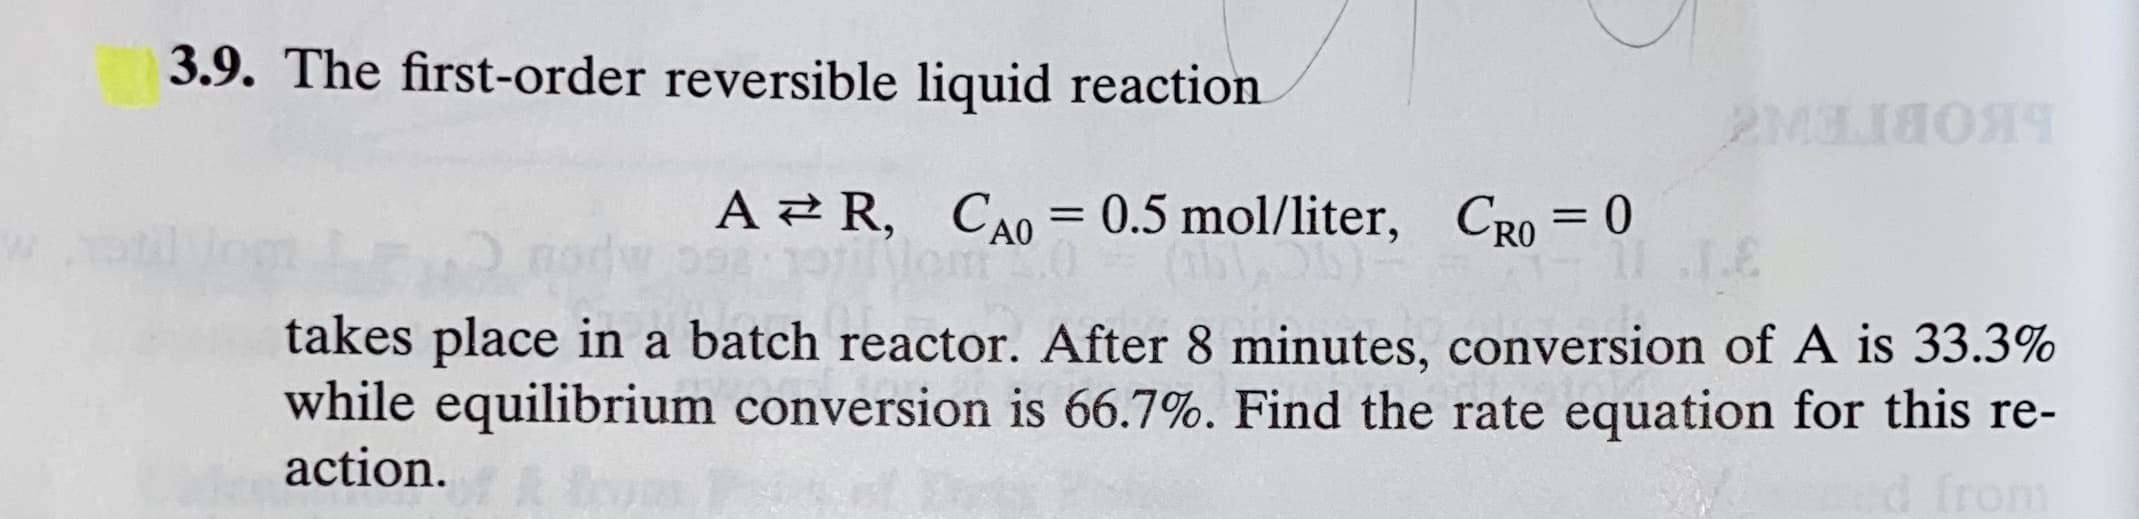 3.9. The first-order reversible liquid reaction
2M8ЛЯОЯЧ
A 2 R, CA0= 0.5 mol/liter, CRO = 0
9311
takes place in a batch reactor. After 8 minutes, conversion of A is 33.3%
while equilibrium conversion is 66.7%. Find the rate equation for this re-
action.
